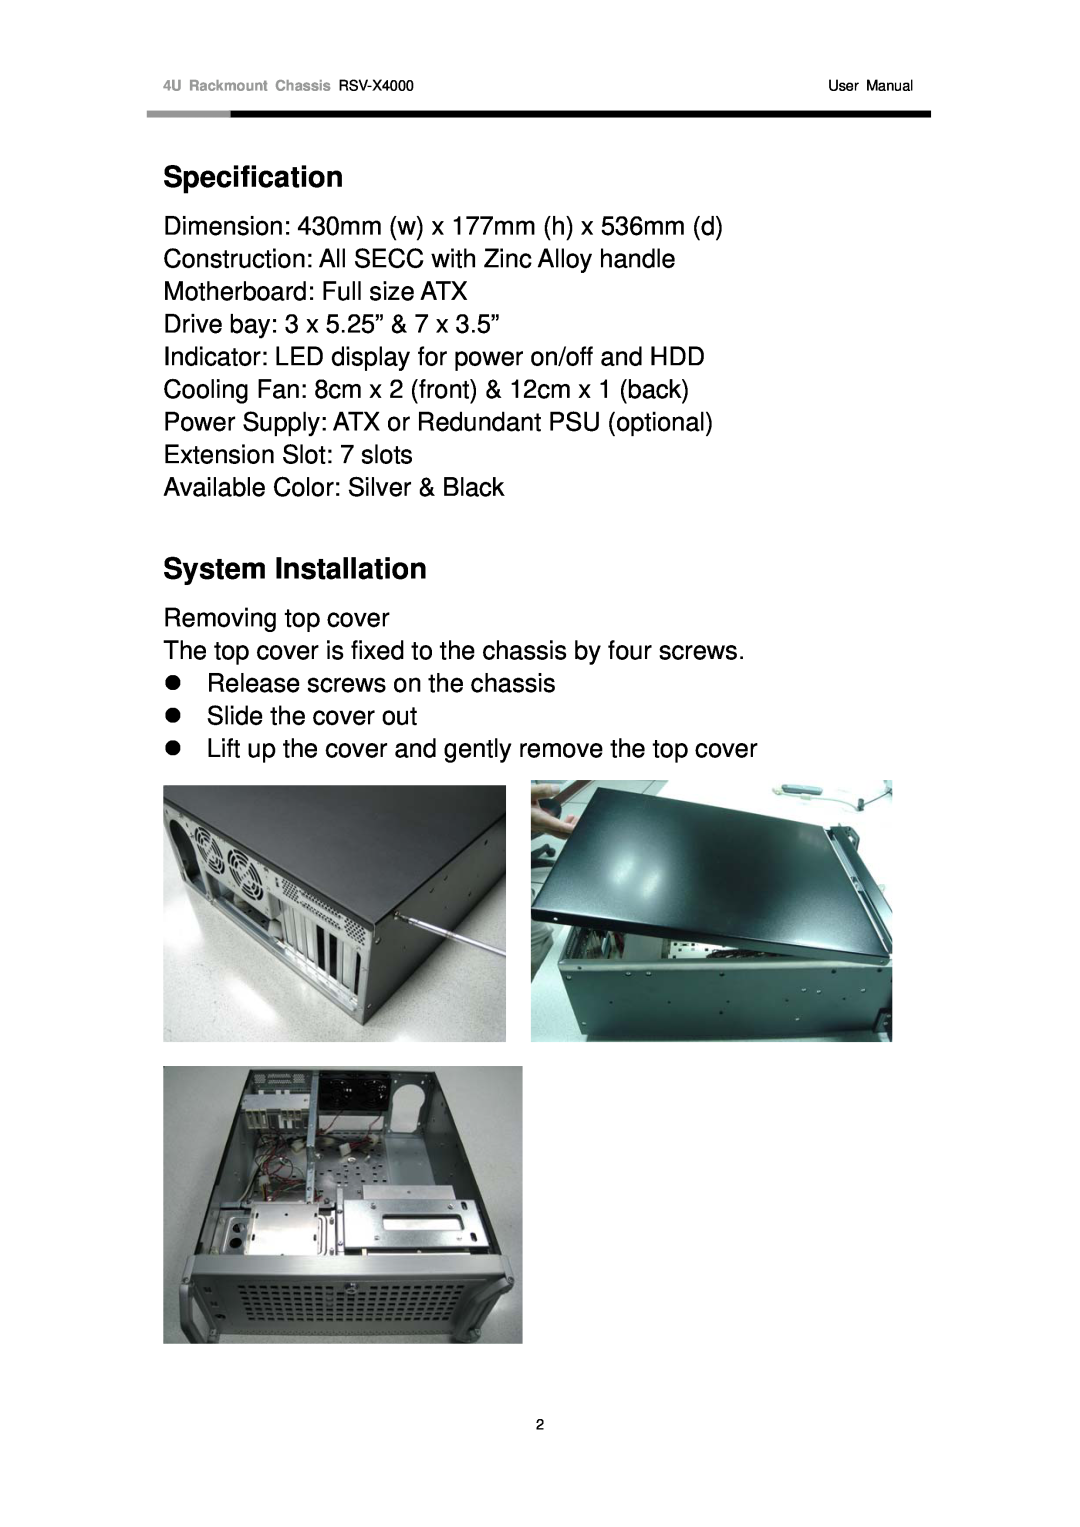 Rosewill RSV-X4000 user manual Specification, System Installation 